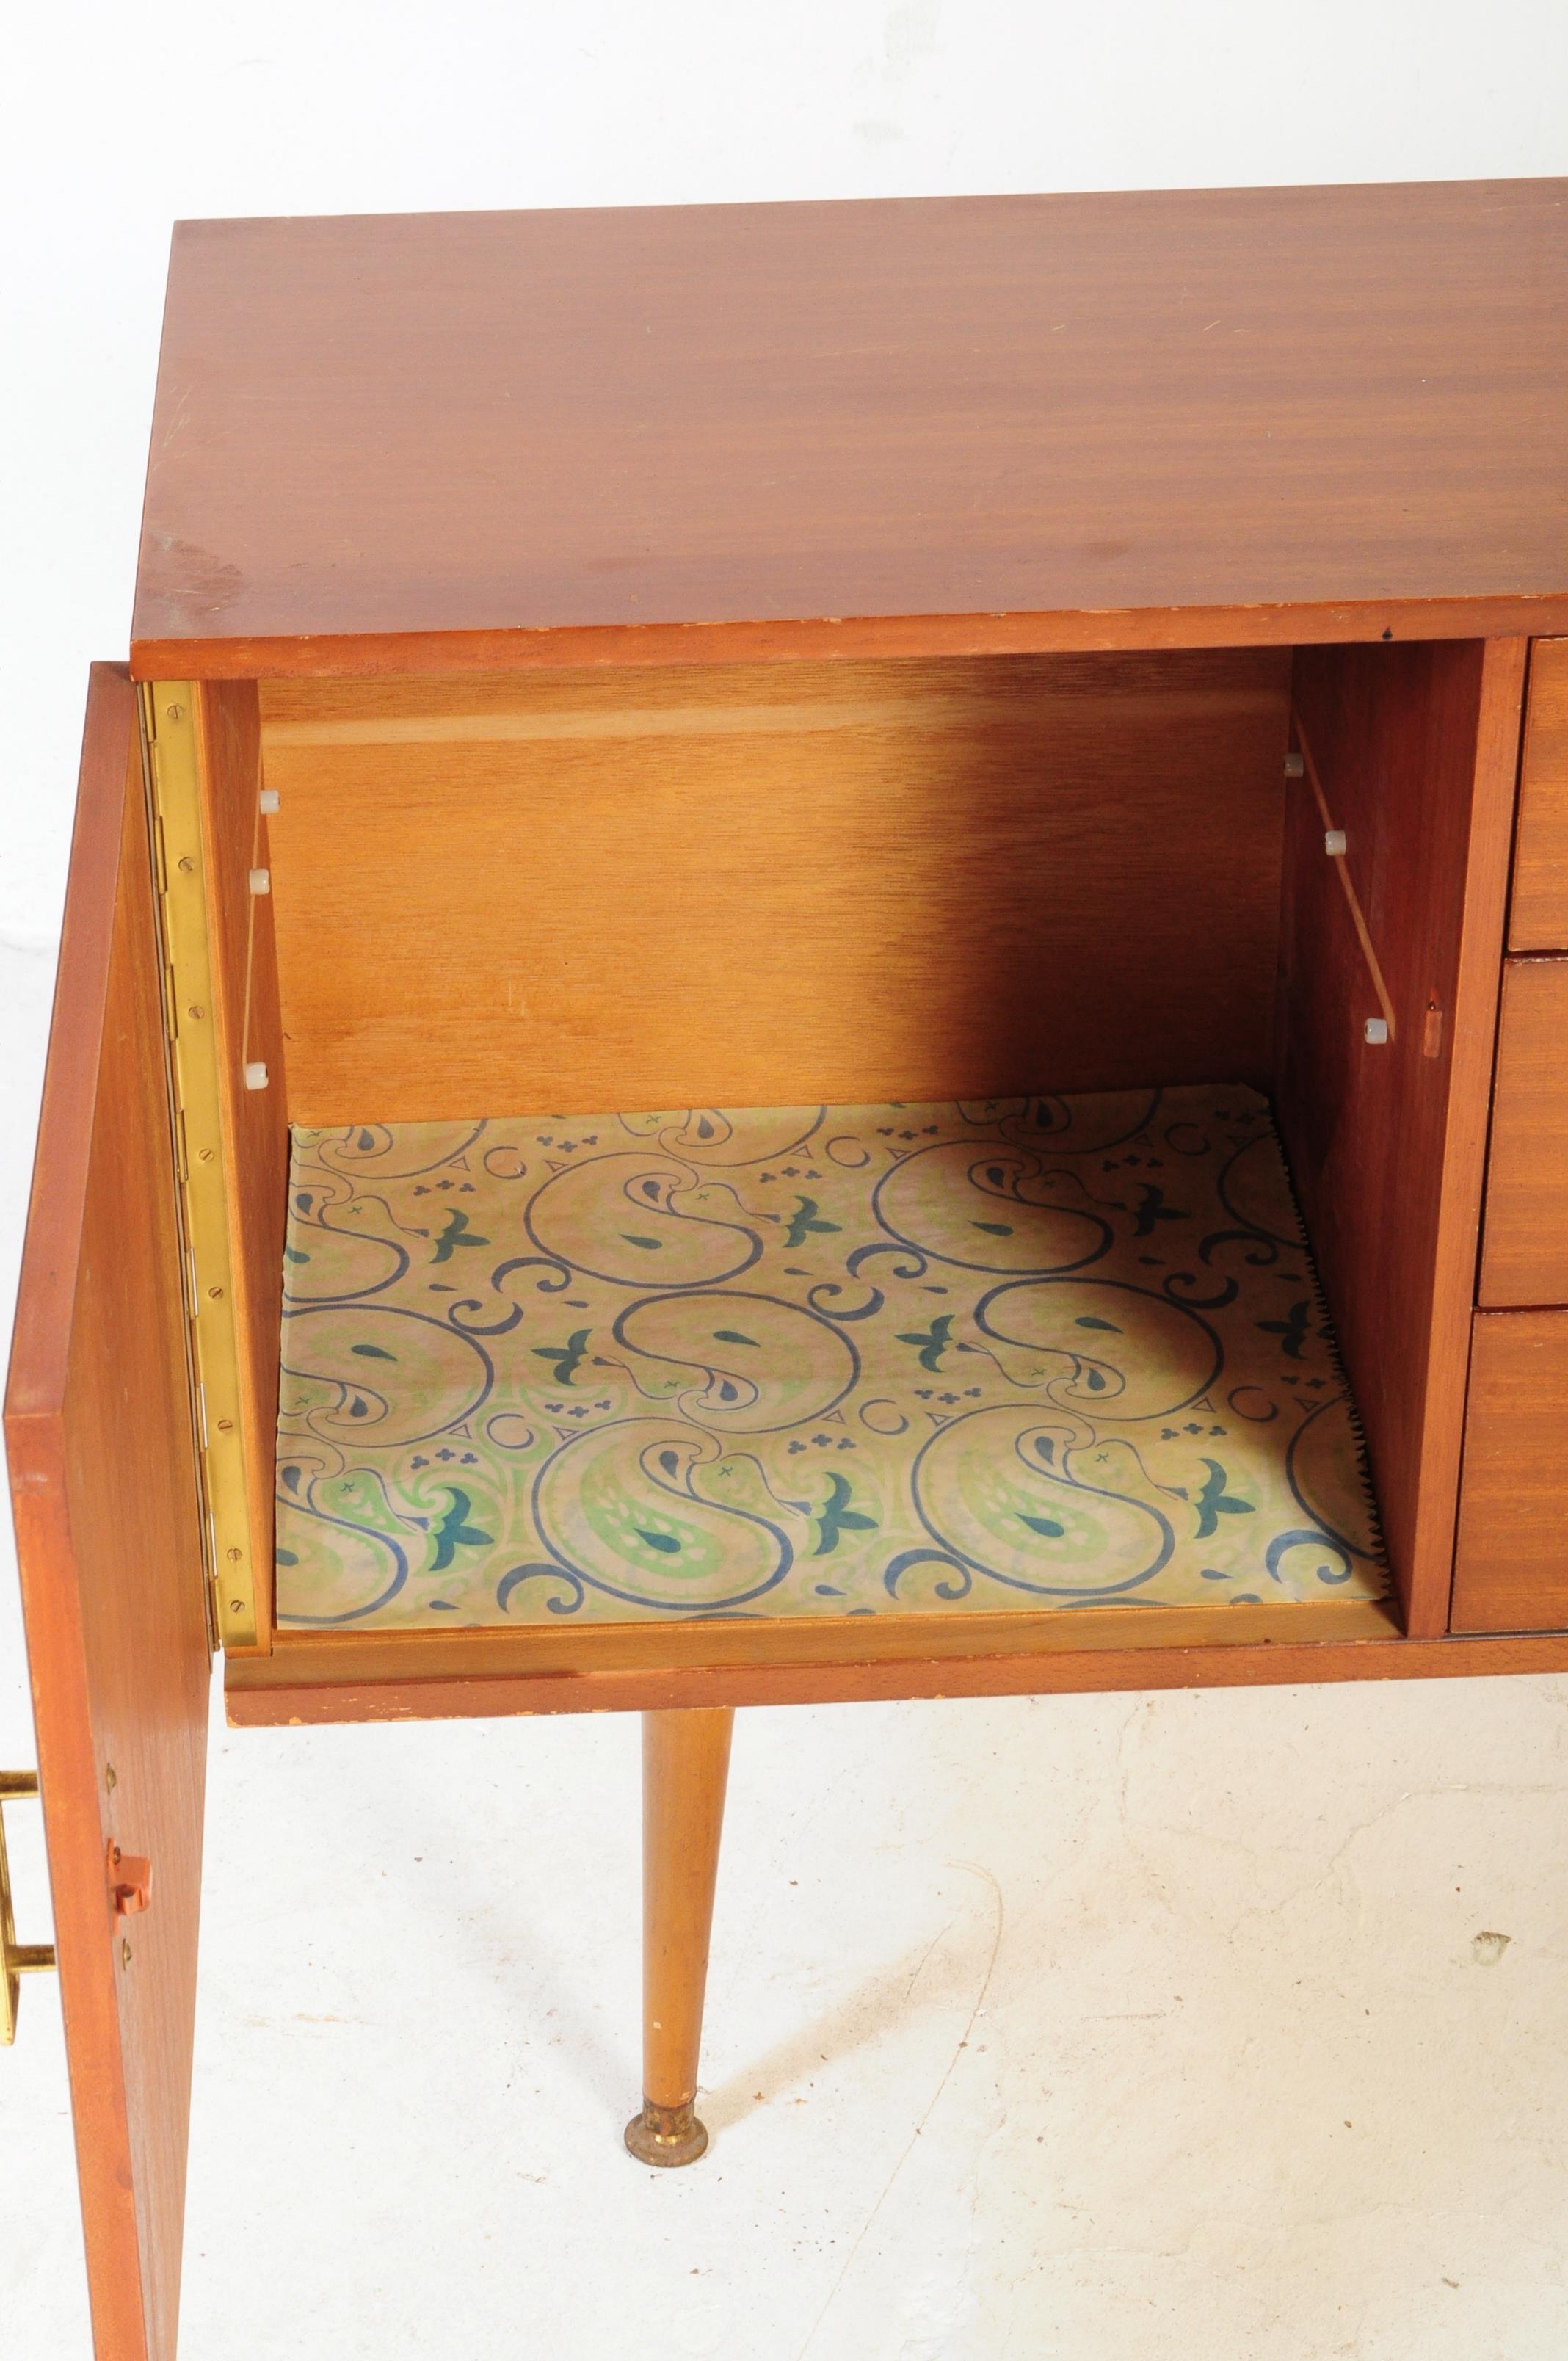 A RETRO VINTAGE 1970 WOODEN SIDEBOARD WITH FORMICA COVERED DOORS - Image 3 of 5